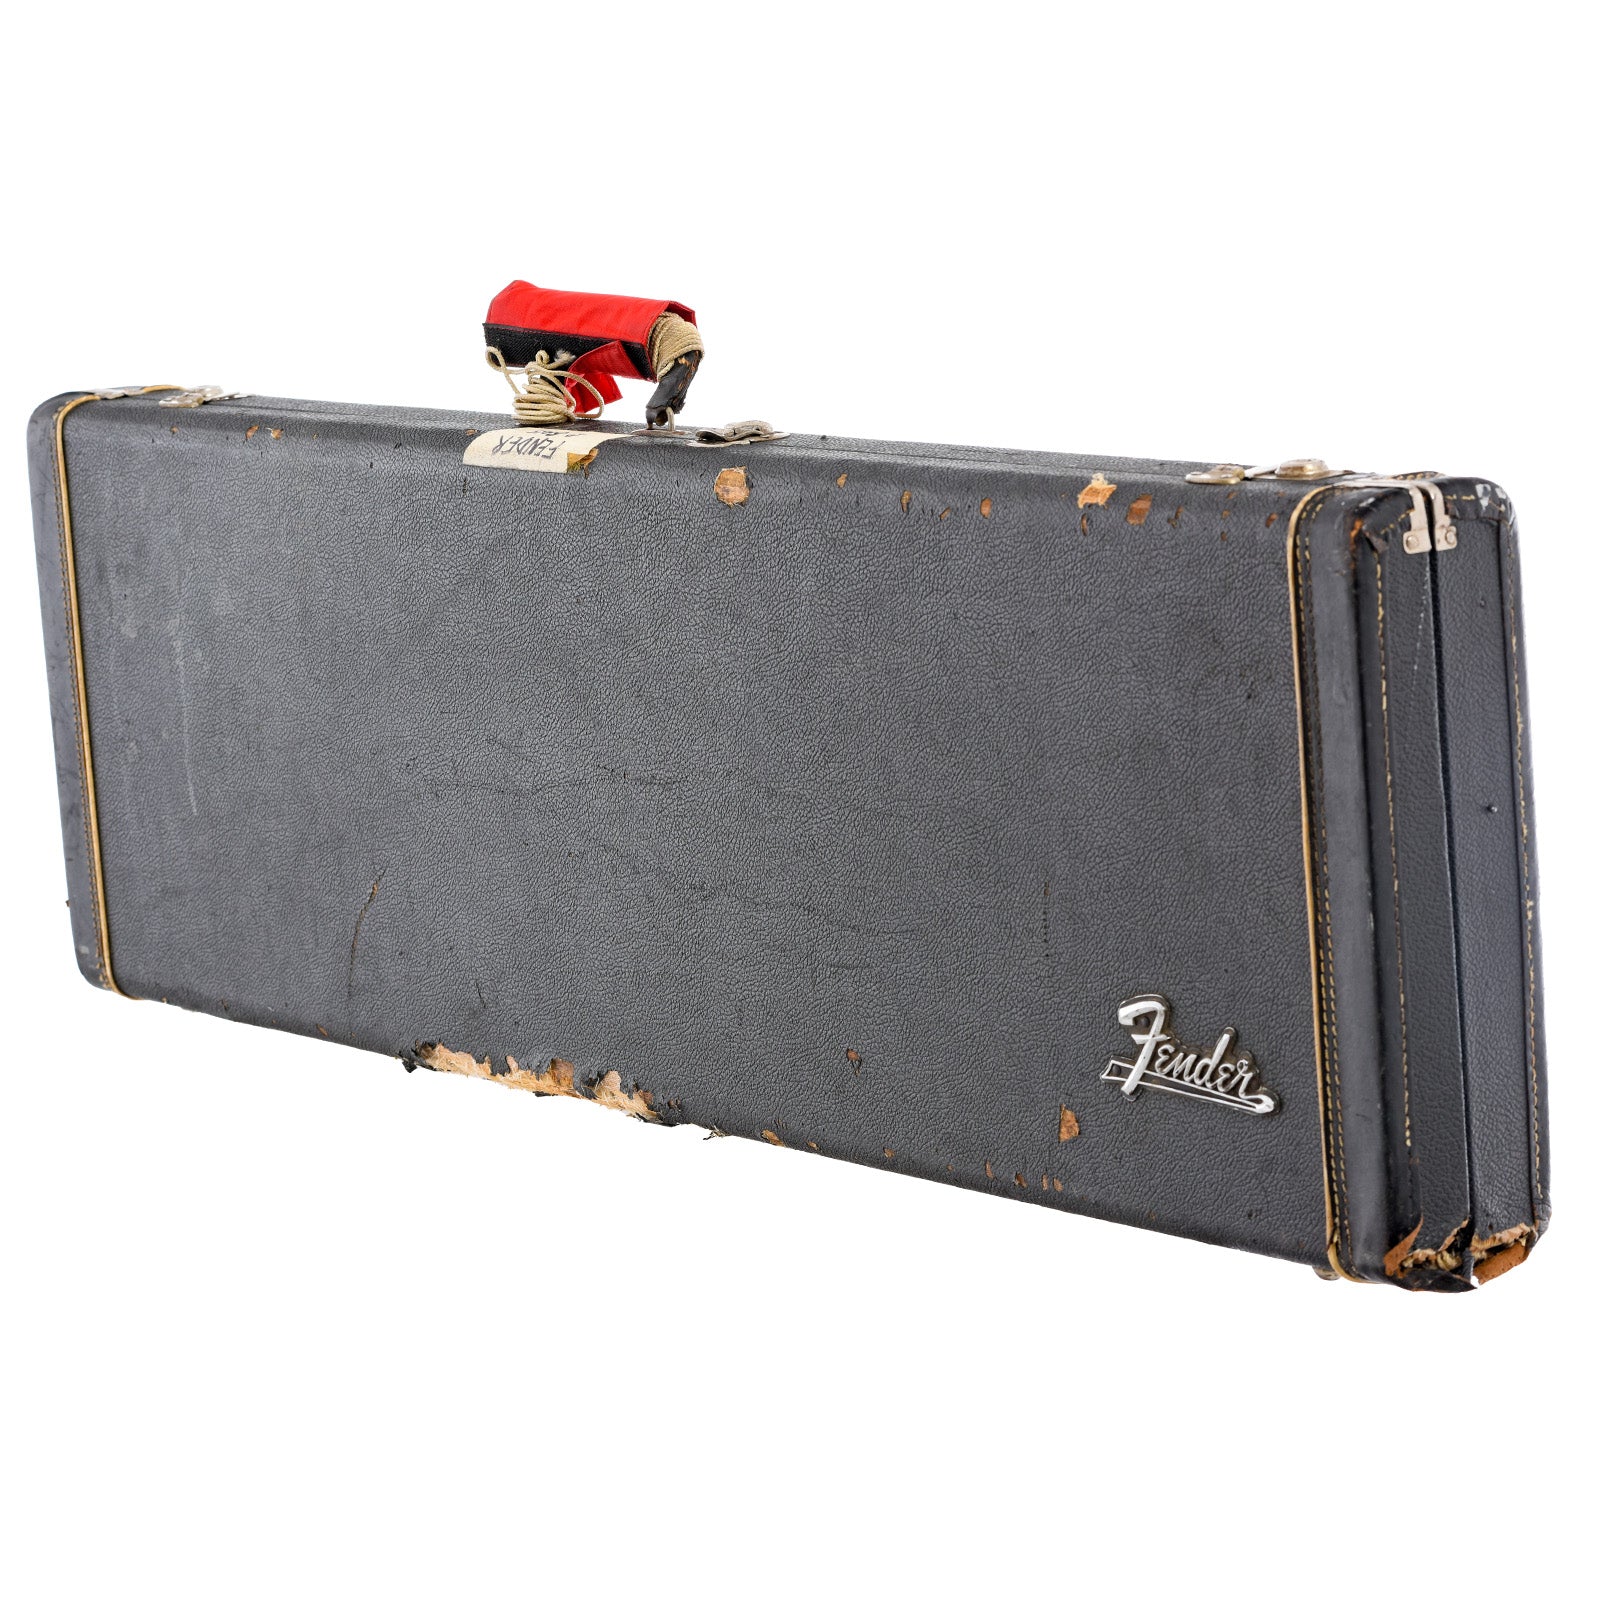 Case for Fender Precision Electric Bass (1967)